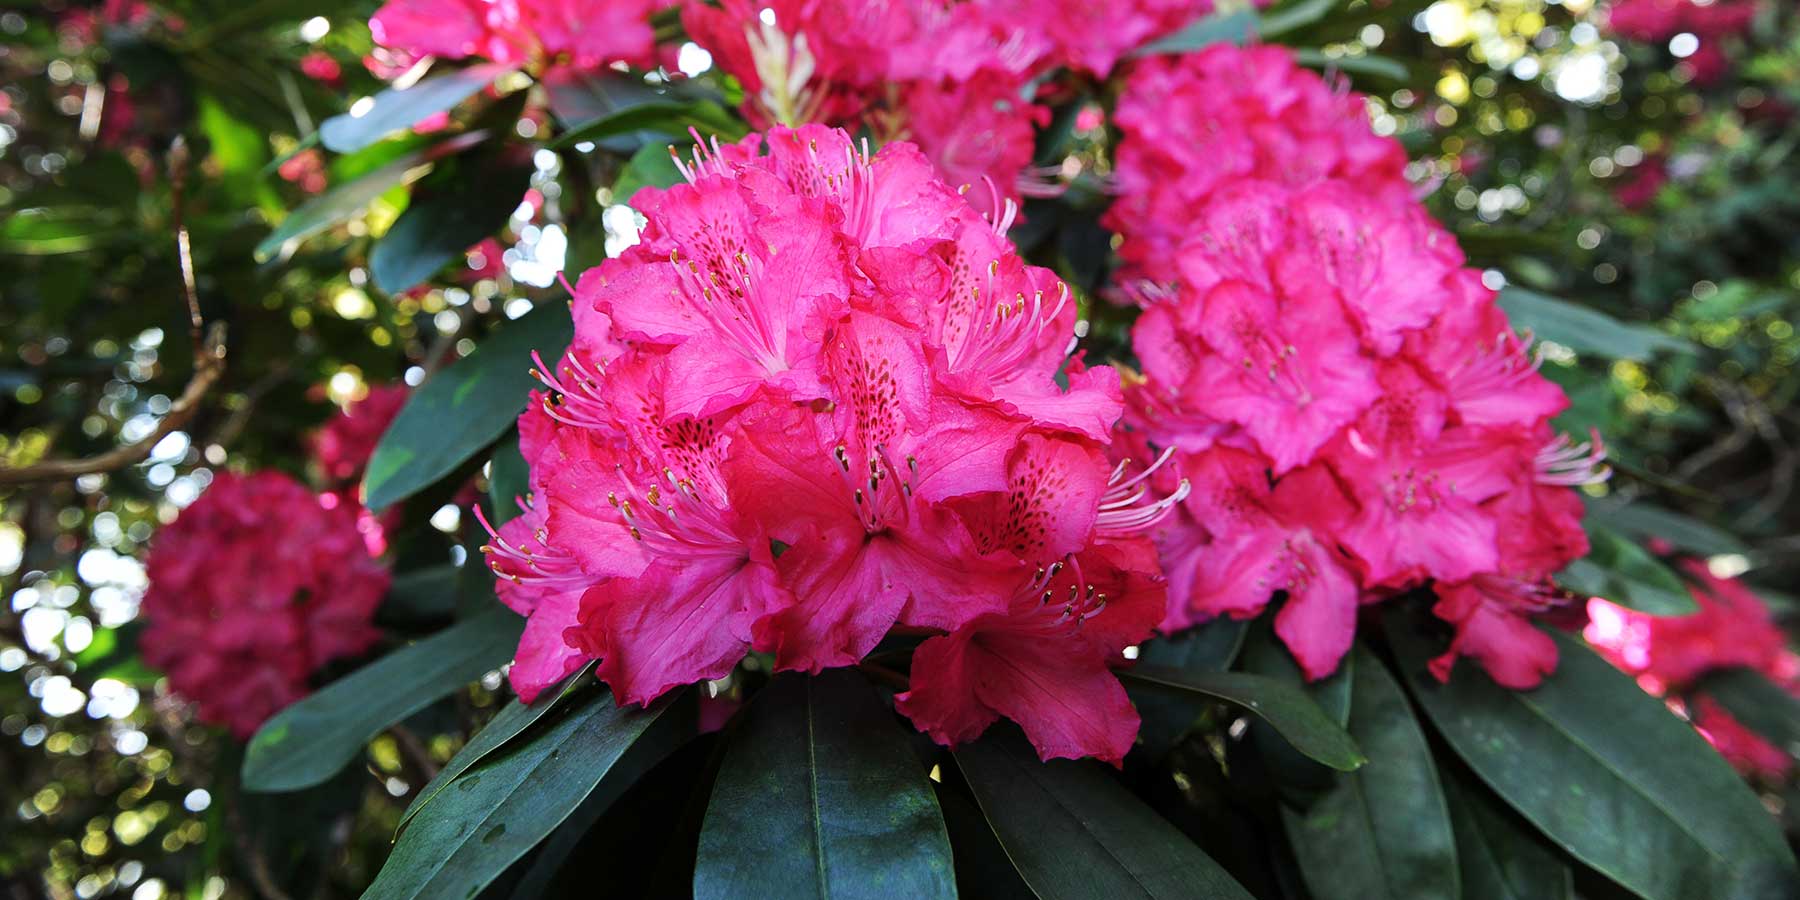 Watering rhododendrons